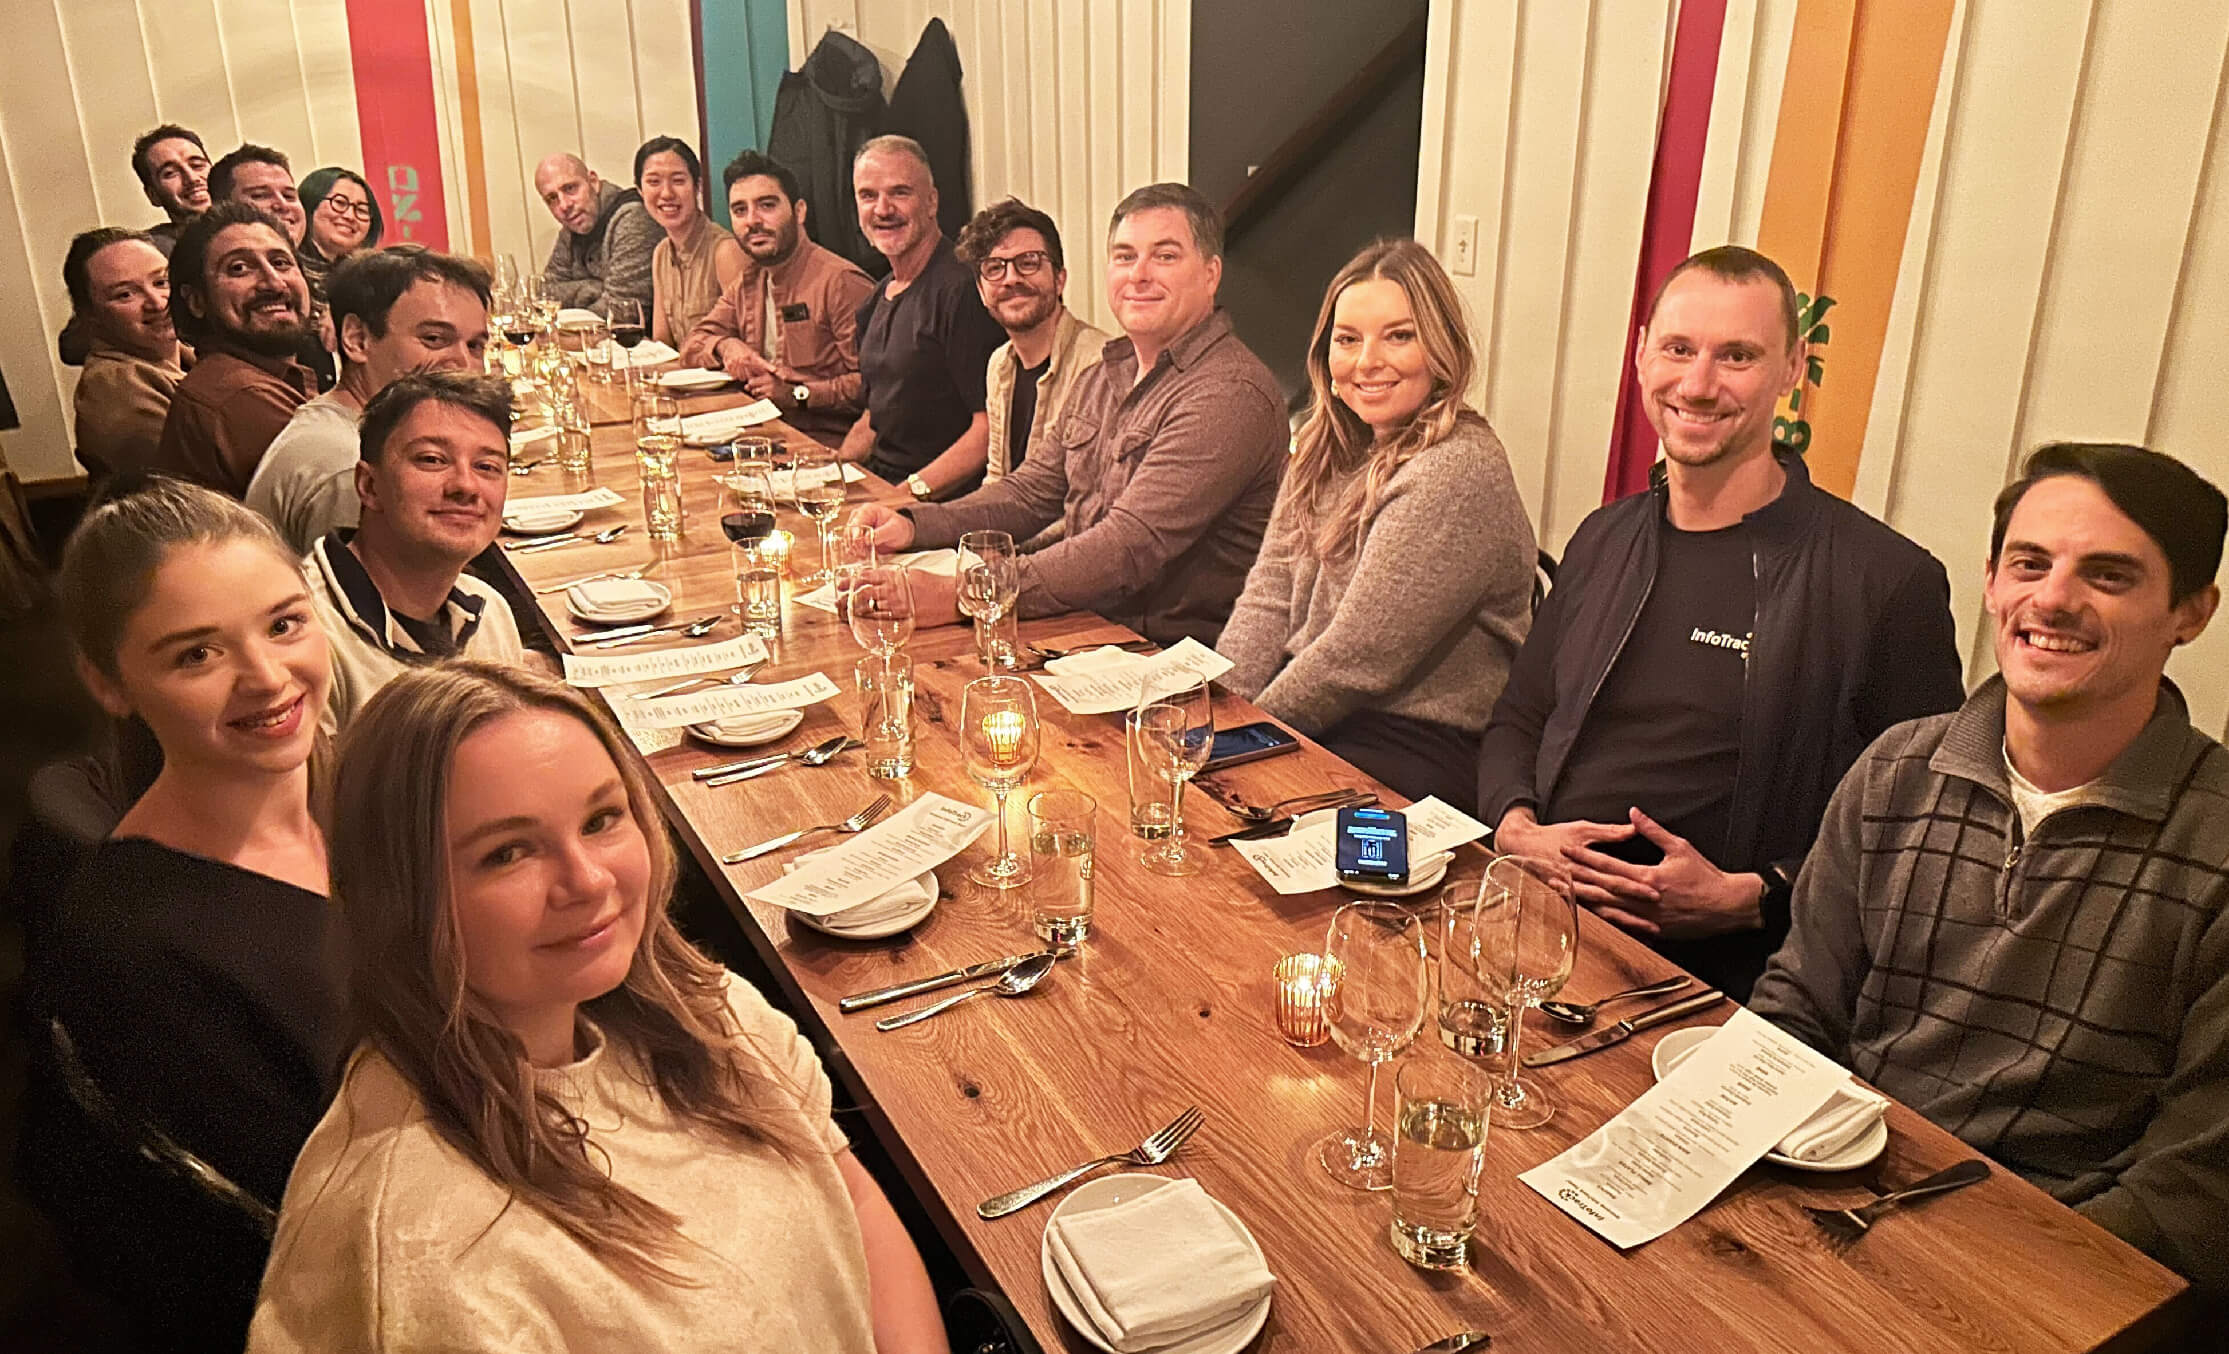 Team members seated at a long wooden table ready to enjoy a meal out